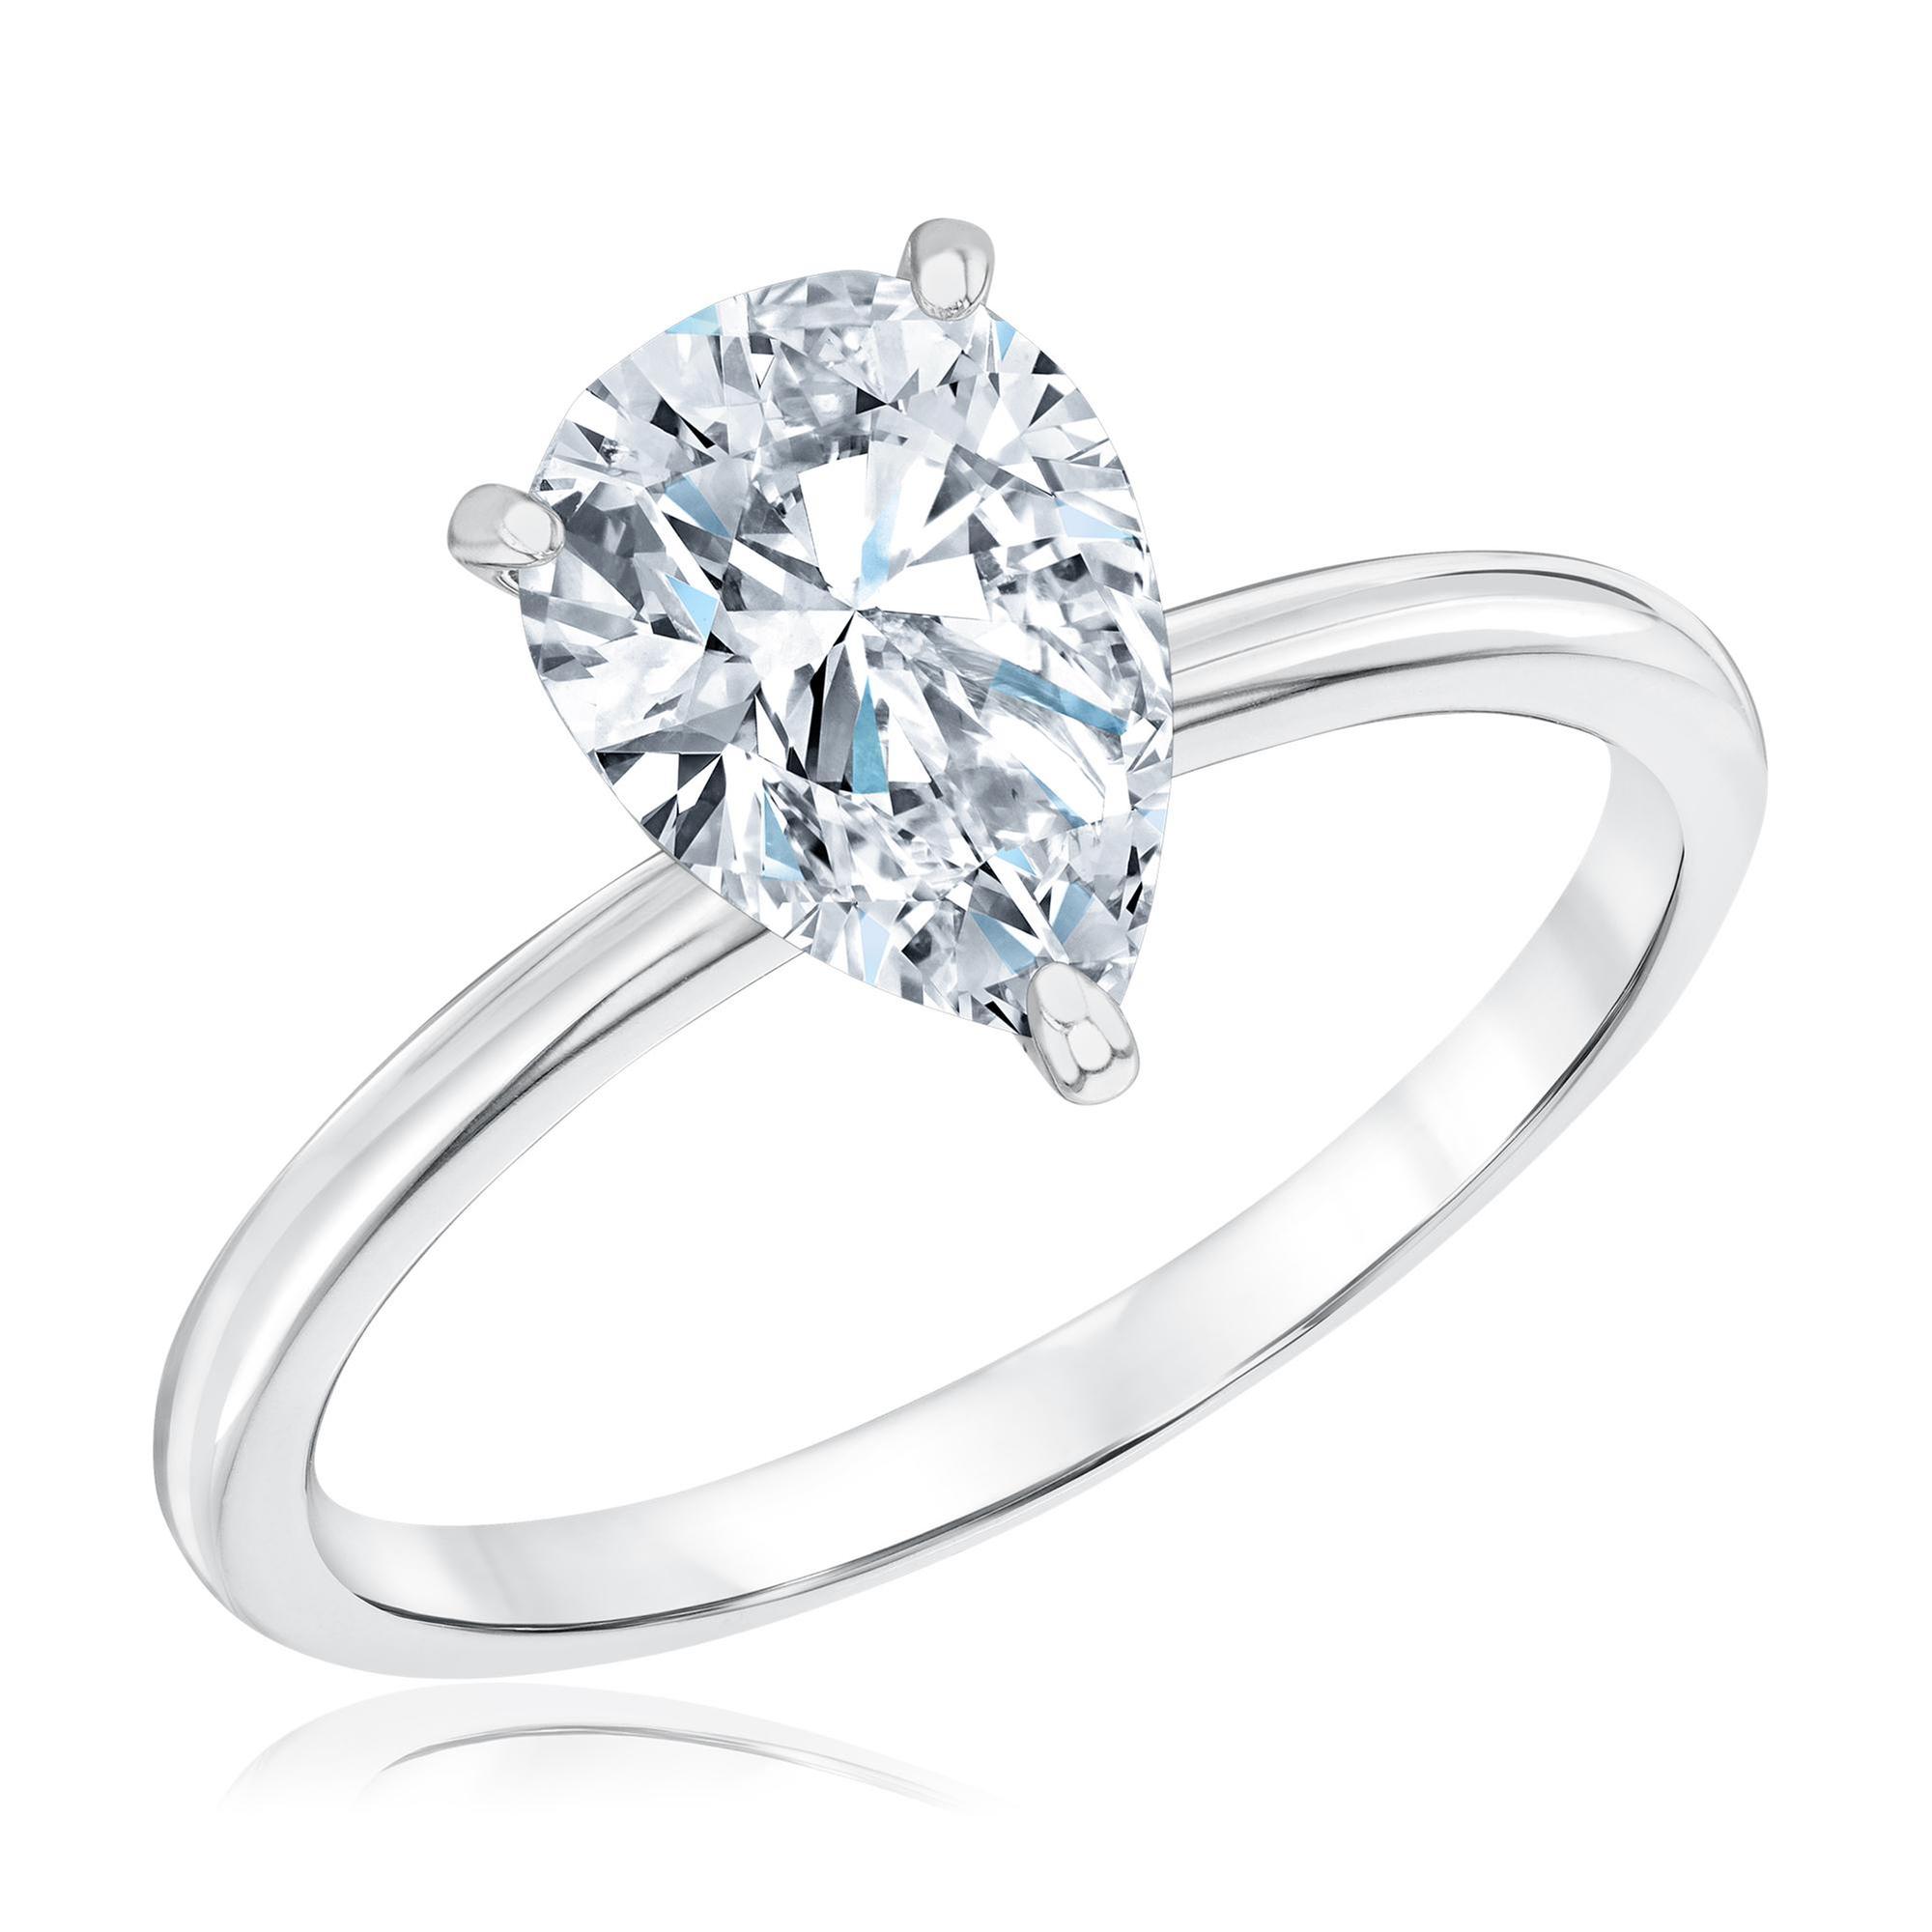 Details about   3Ct White Round Cut Diamond Solitaire Engagement Ring 14k White Gold Finish 